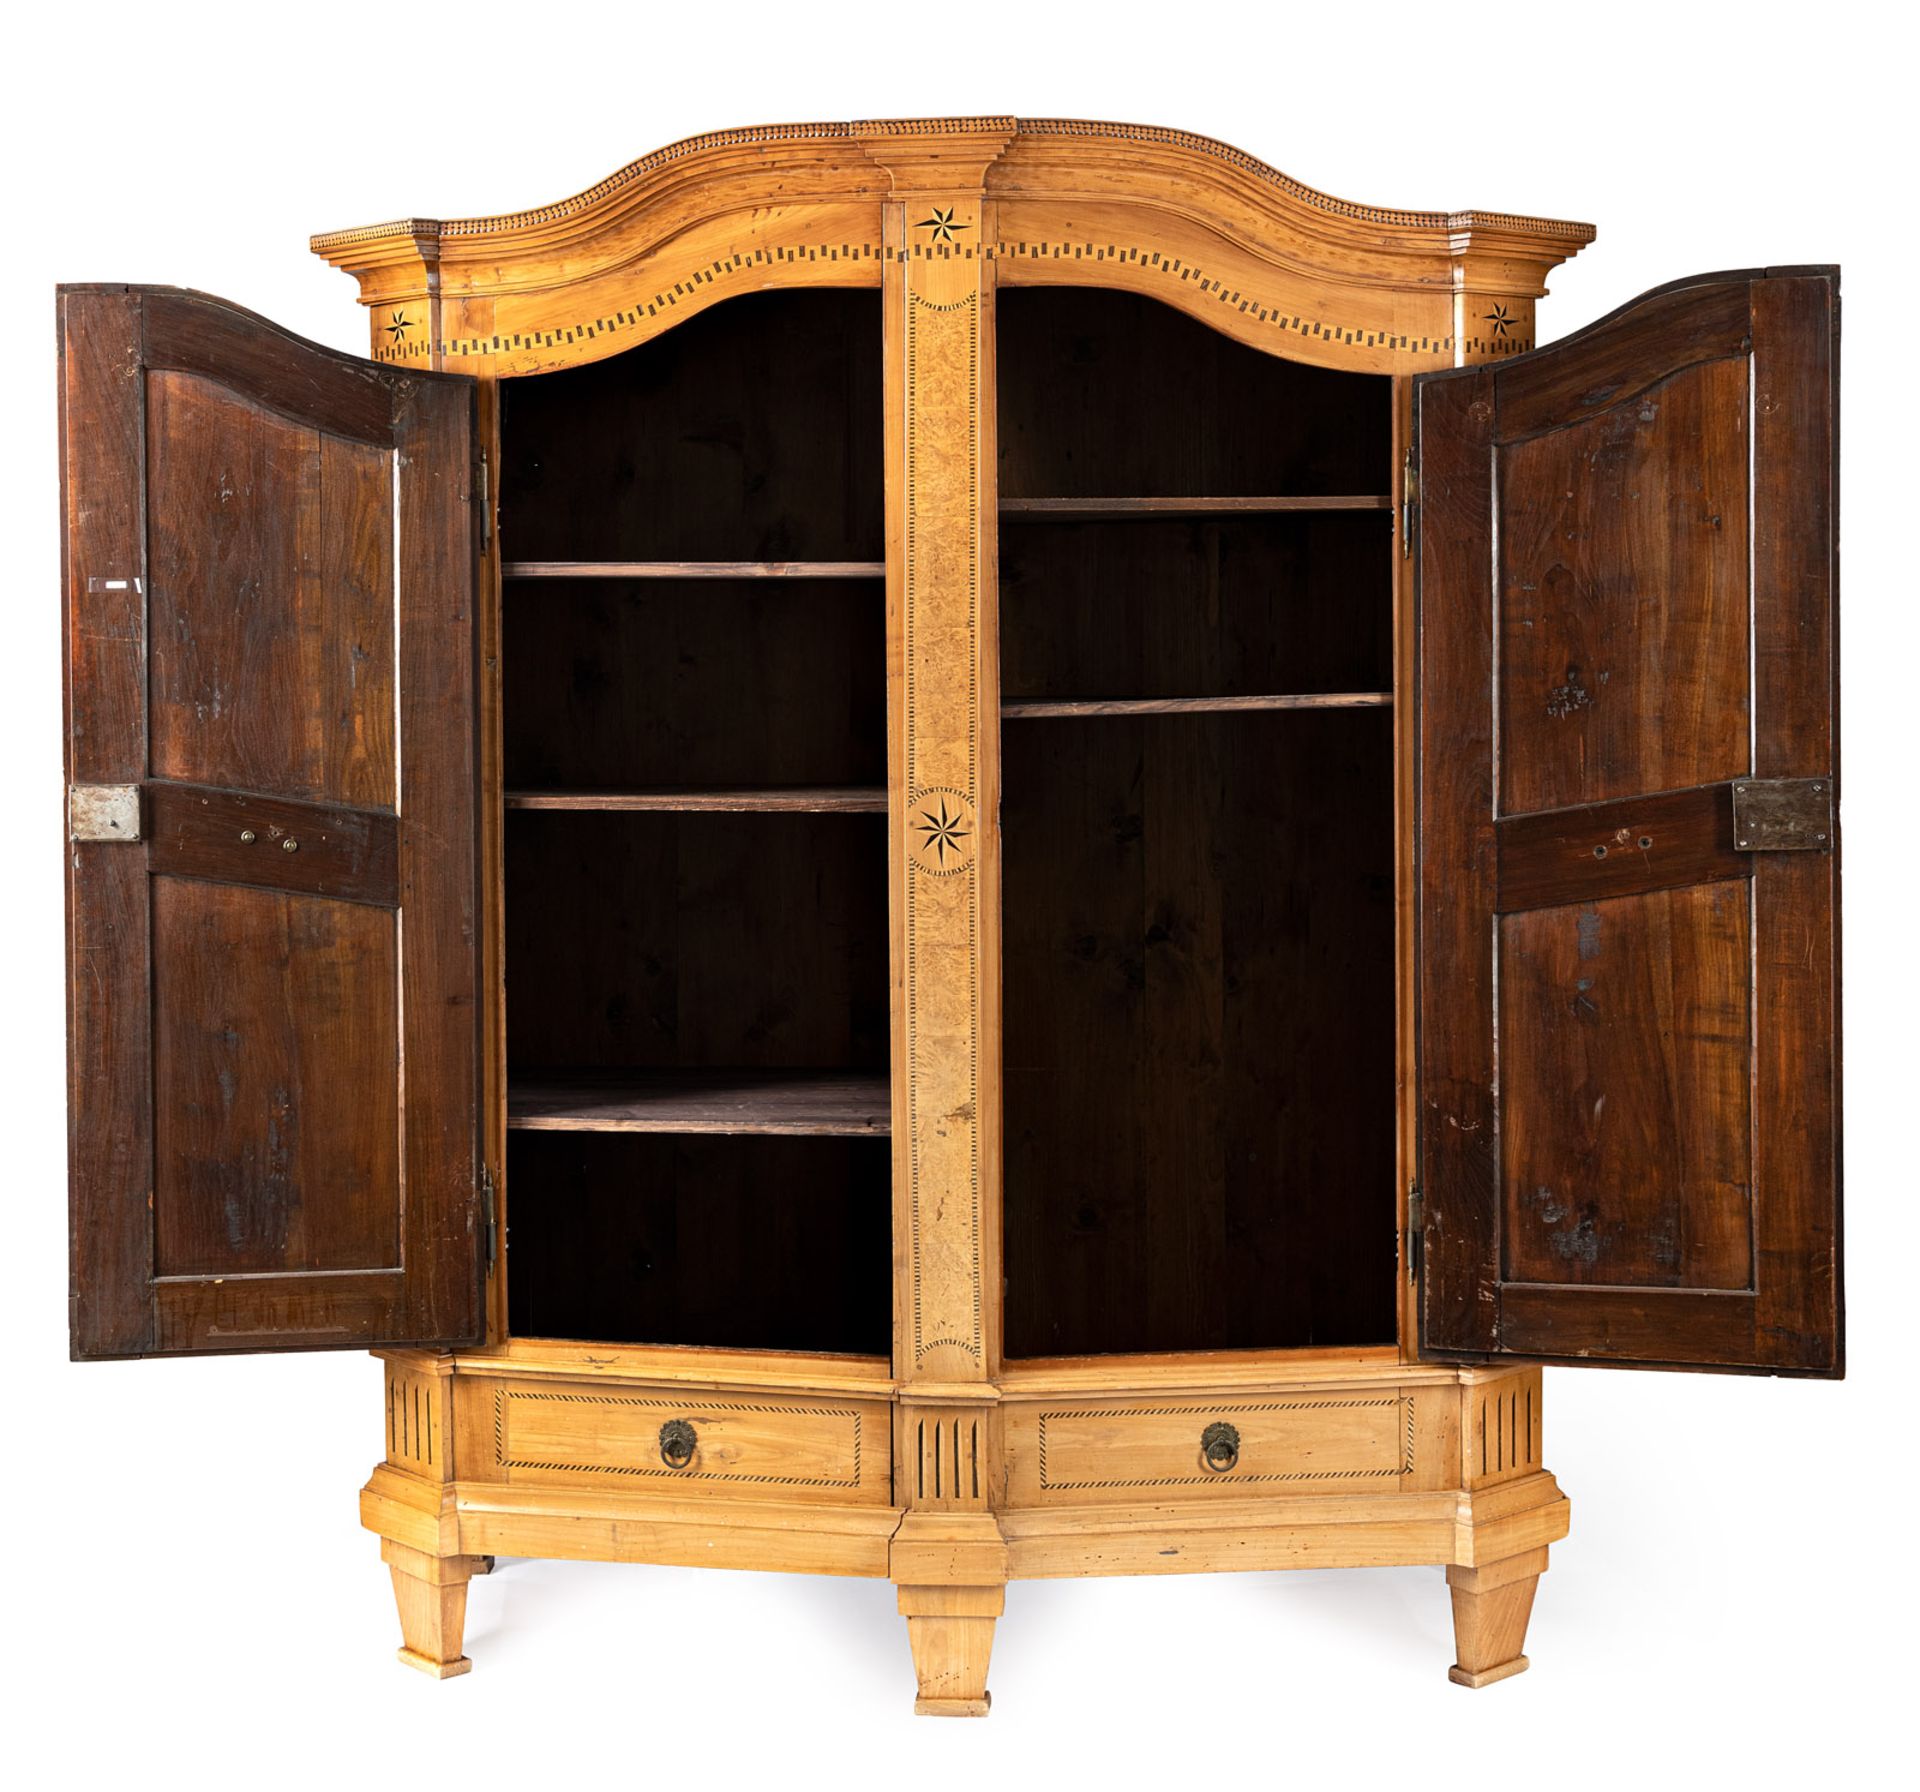 A CHERRYWOOD MAPLE MOOR OAK AND OTHERS "BODENSEE" CUPBOARD - Image 7 of 7